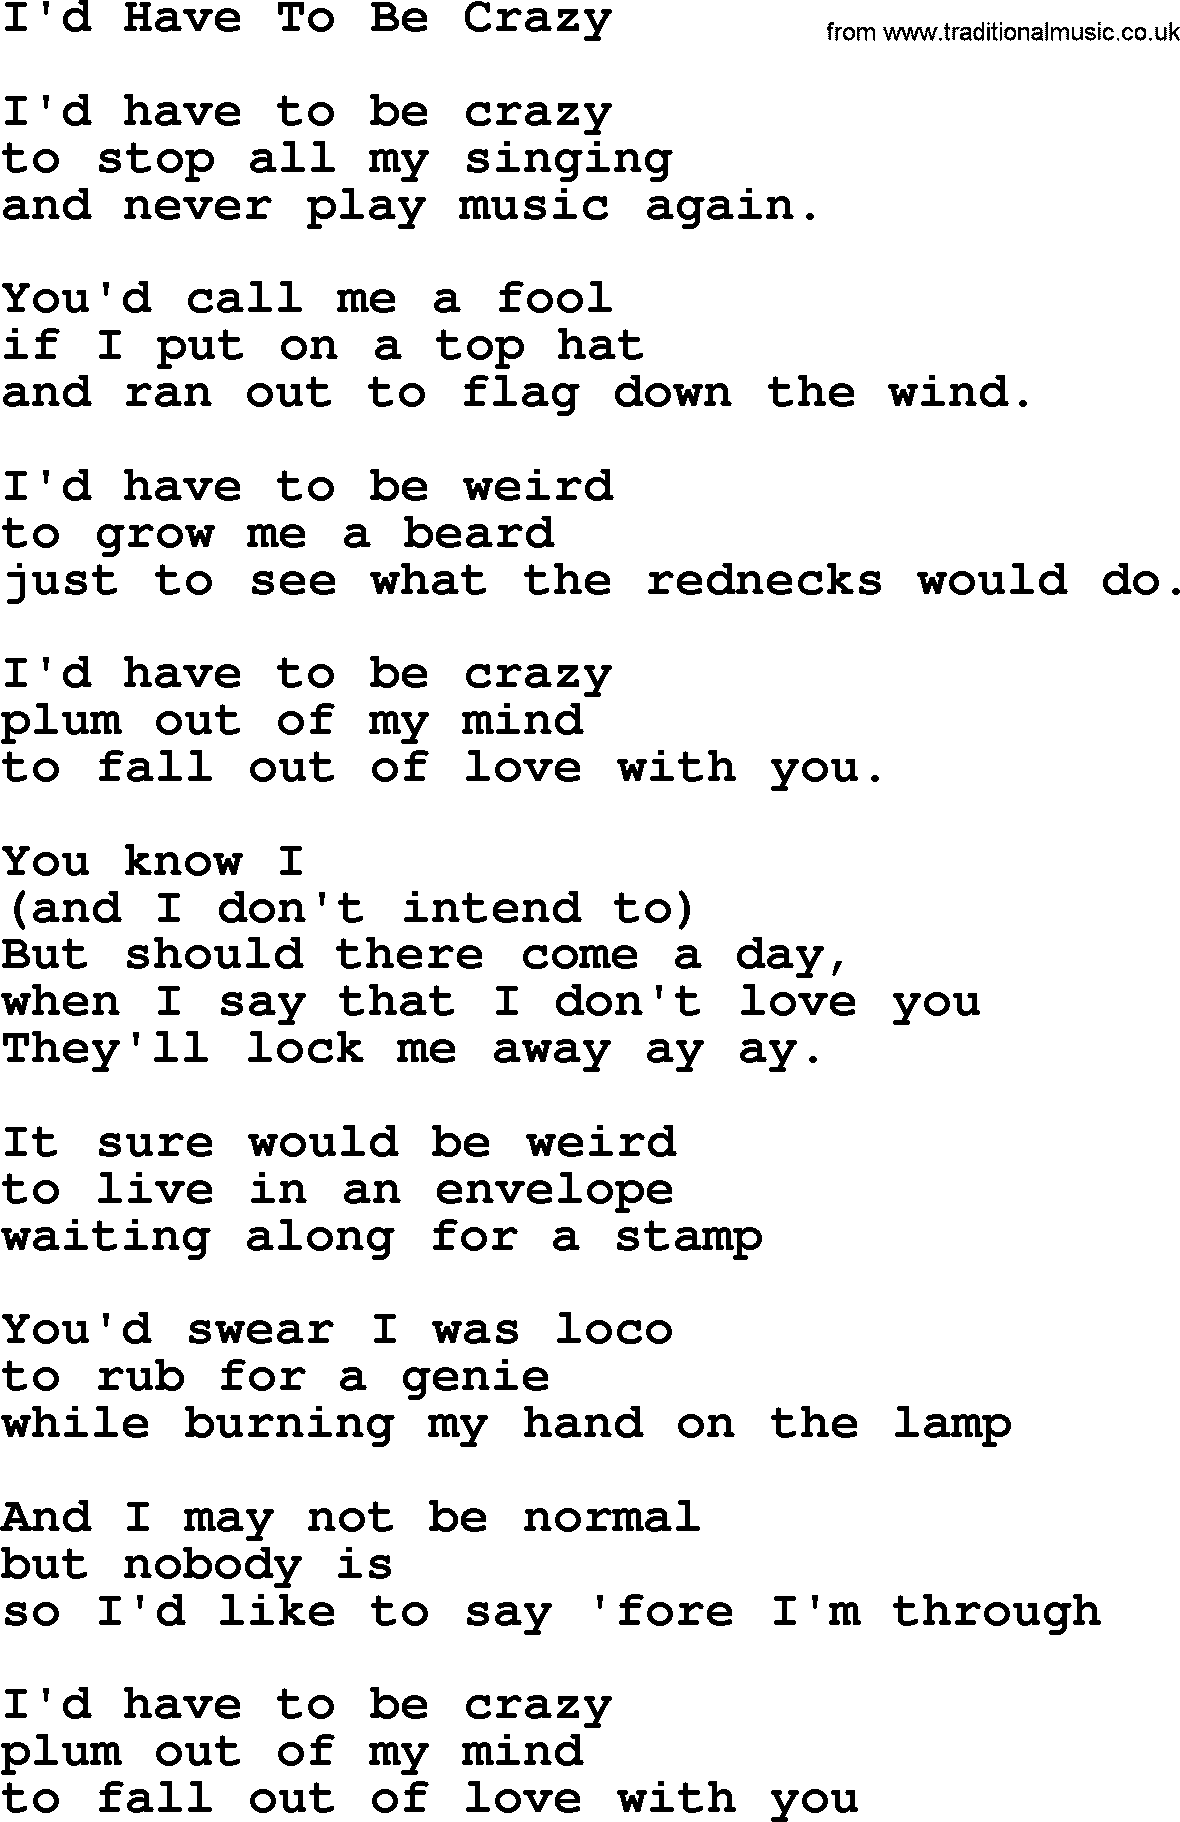 Willie Nelson song: I'd Have To Be Crazy lyrics